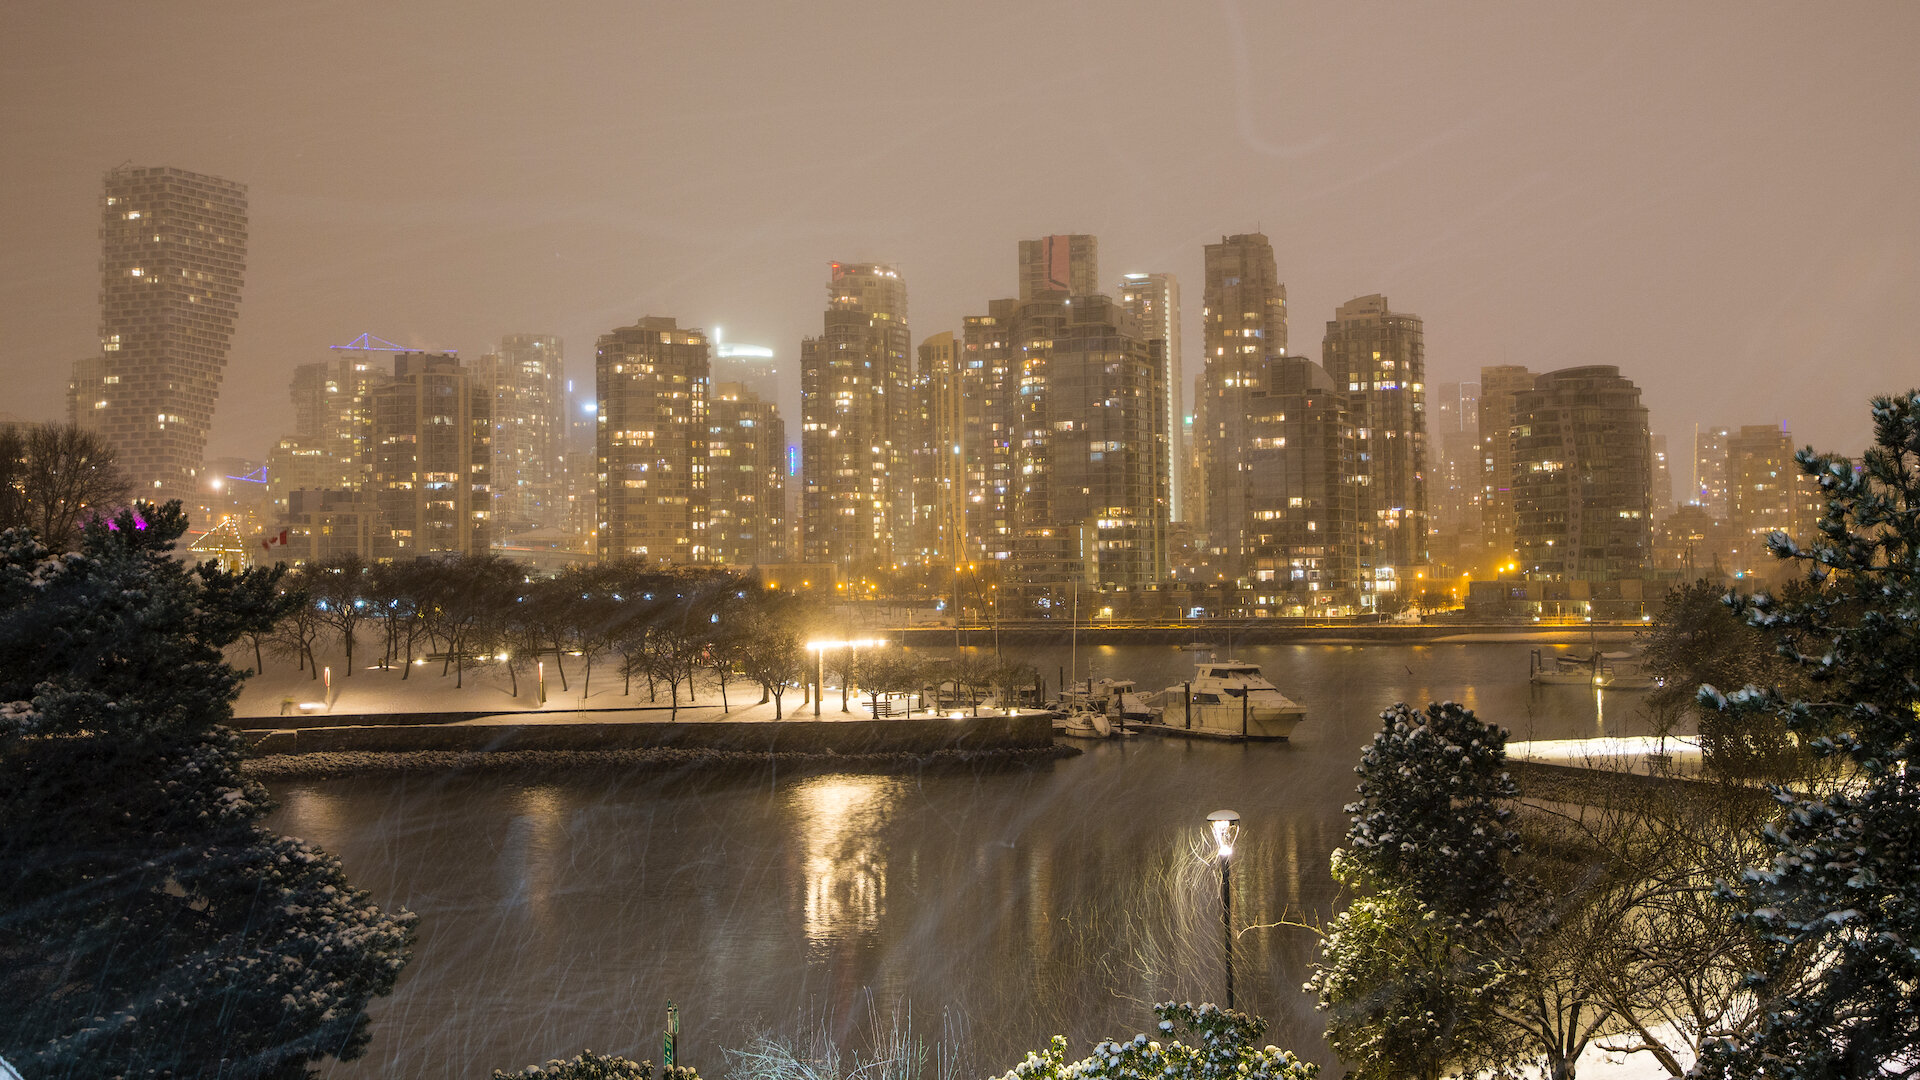  As i headed out, the snow was falling quite hard. The city was shrouded in the clouds. 